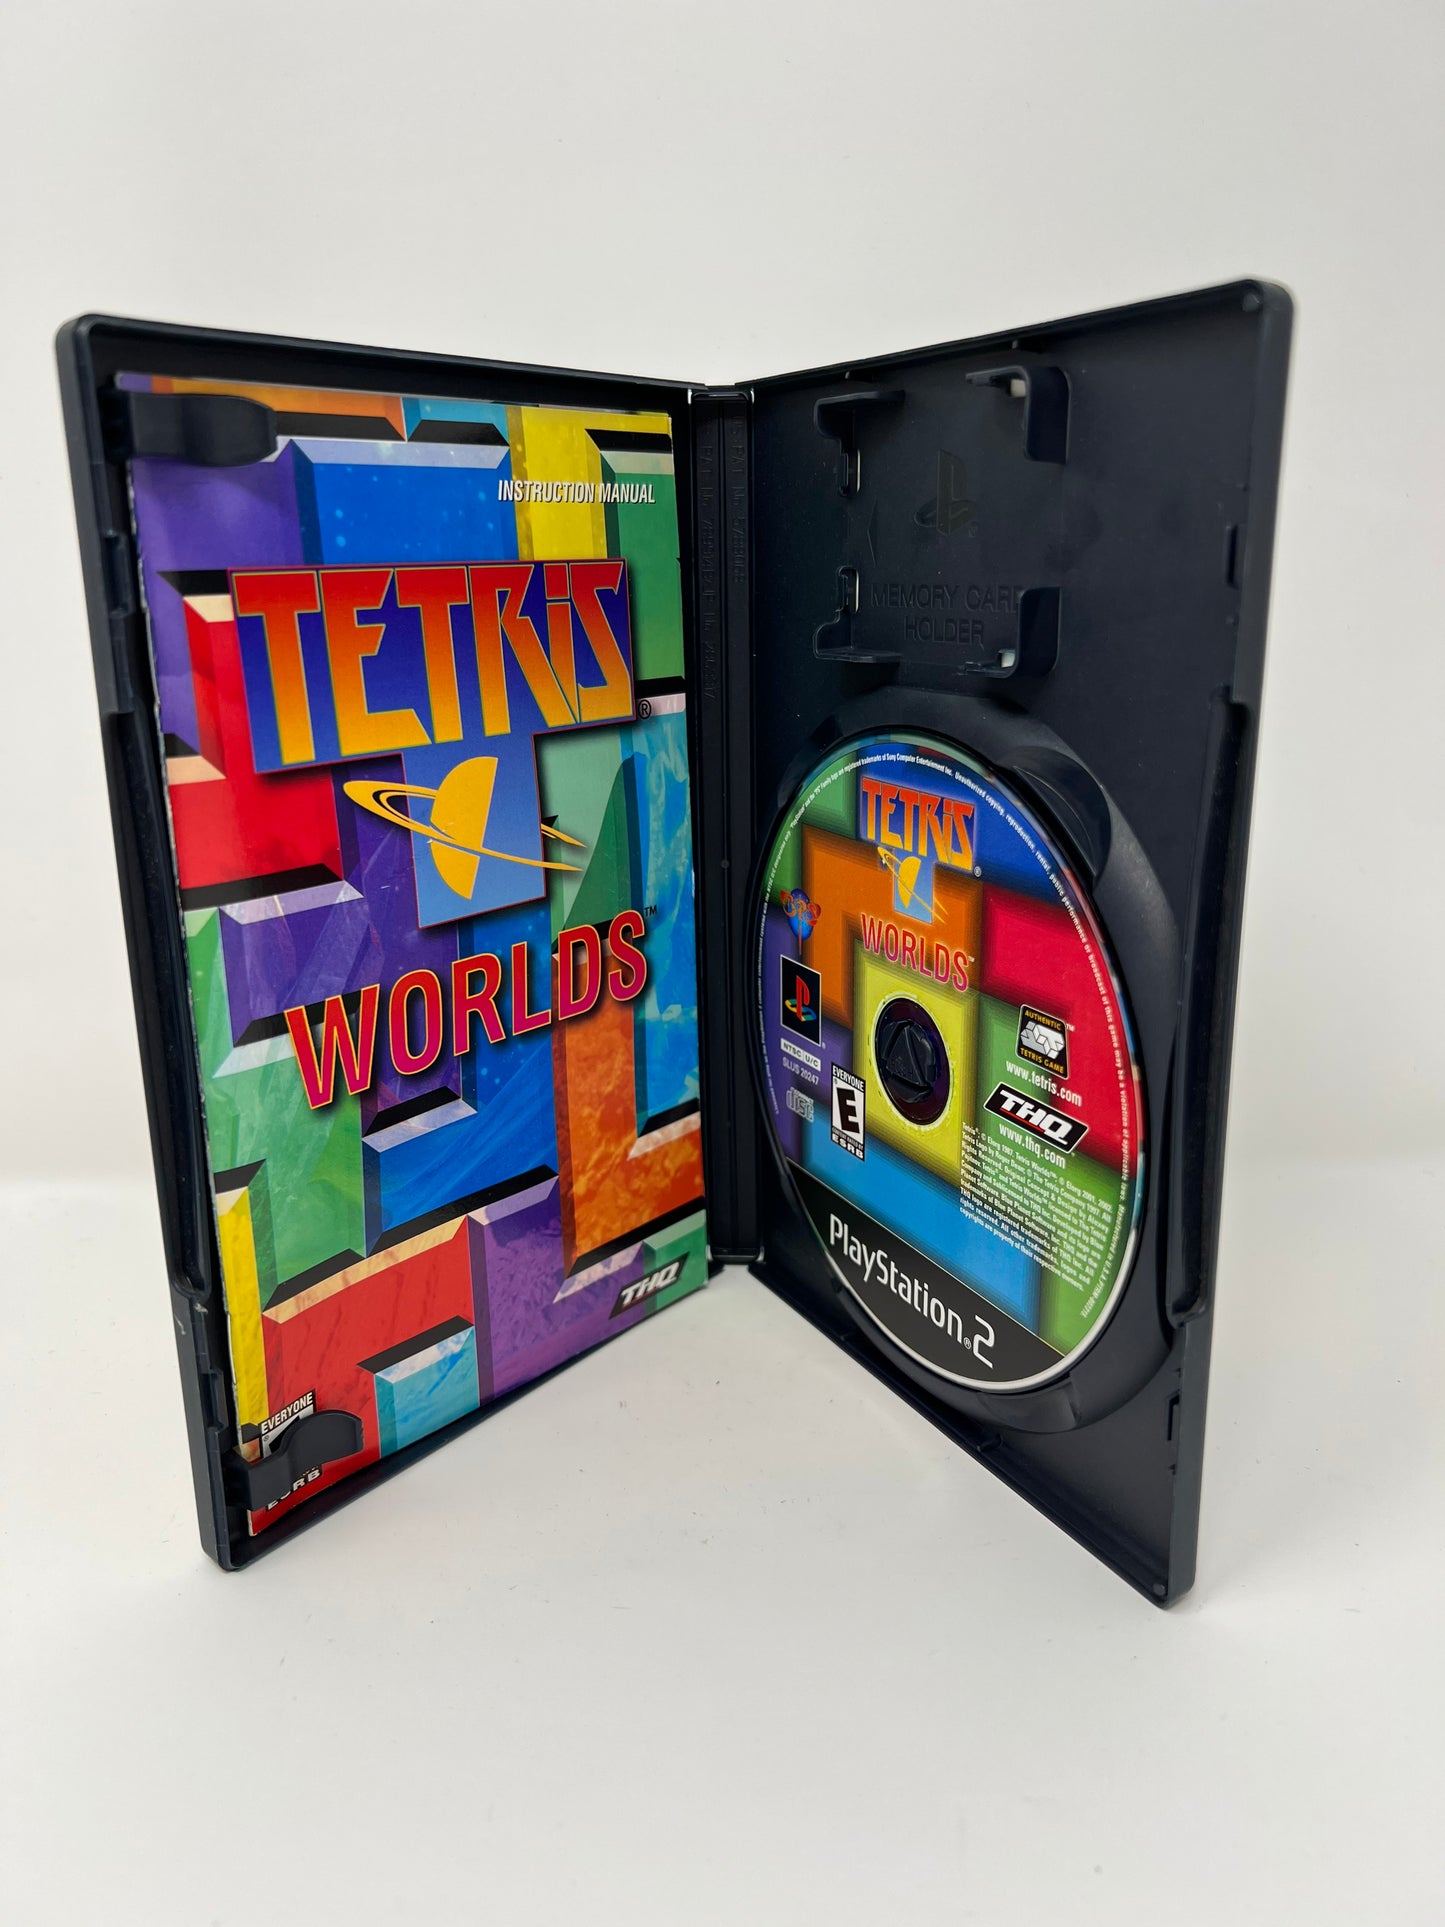 Tetris Worlds - PS2 Game - Used